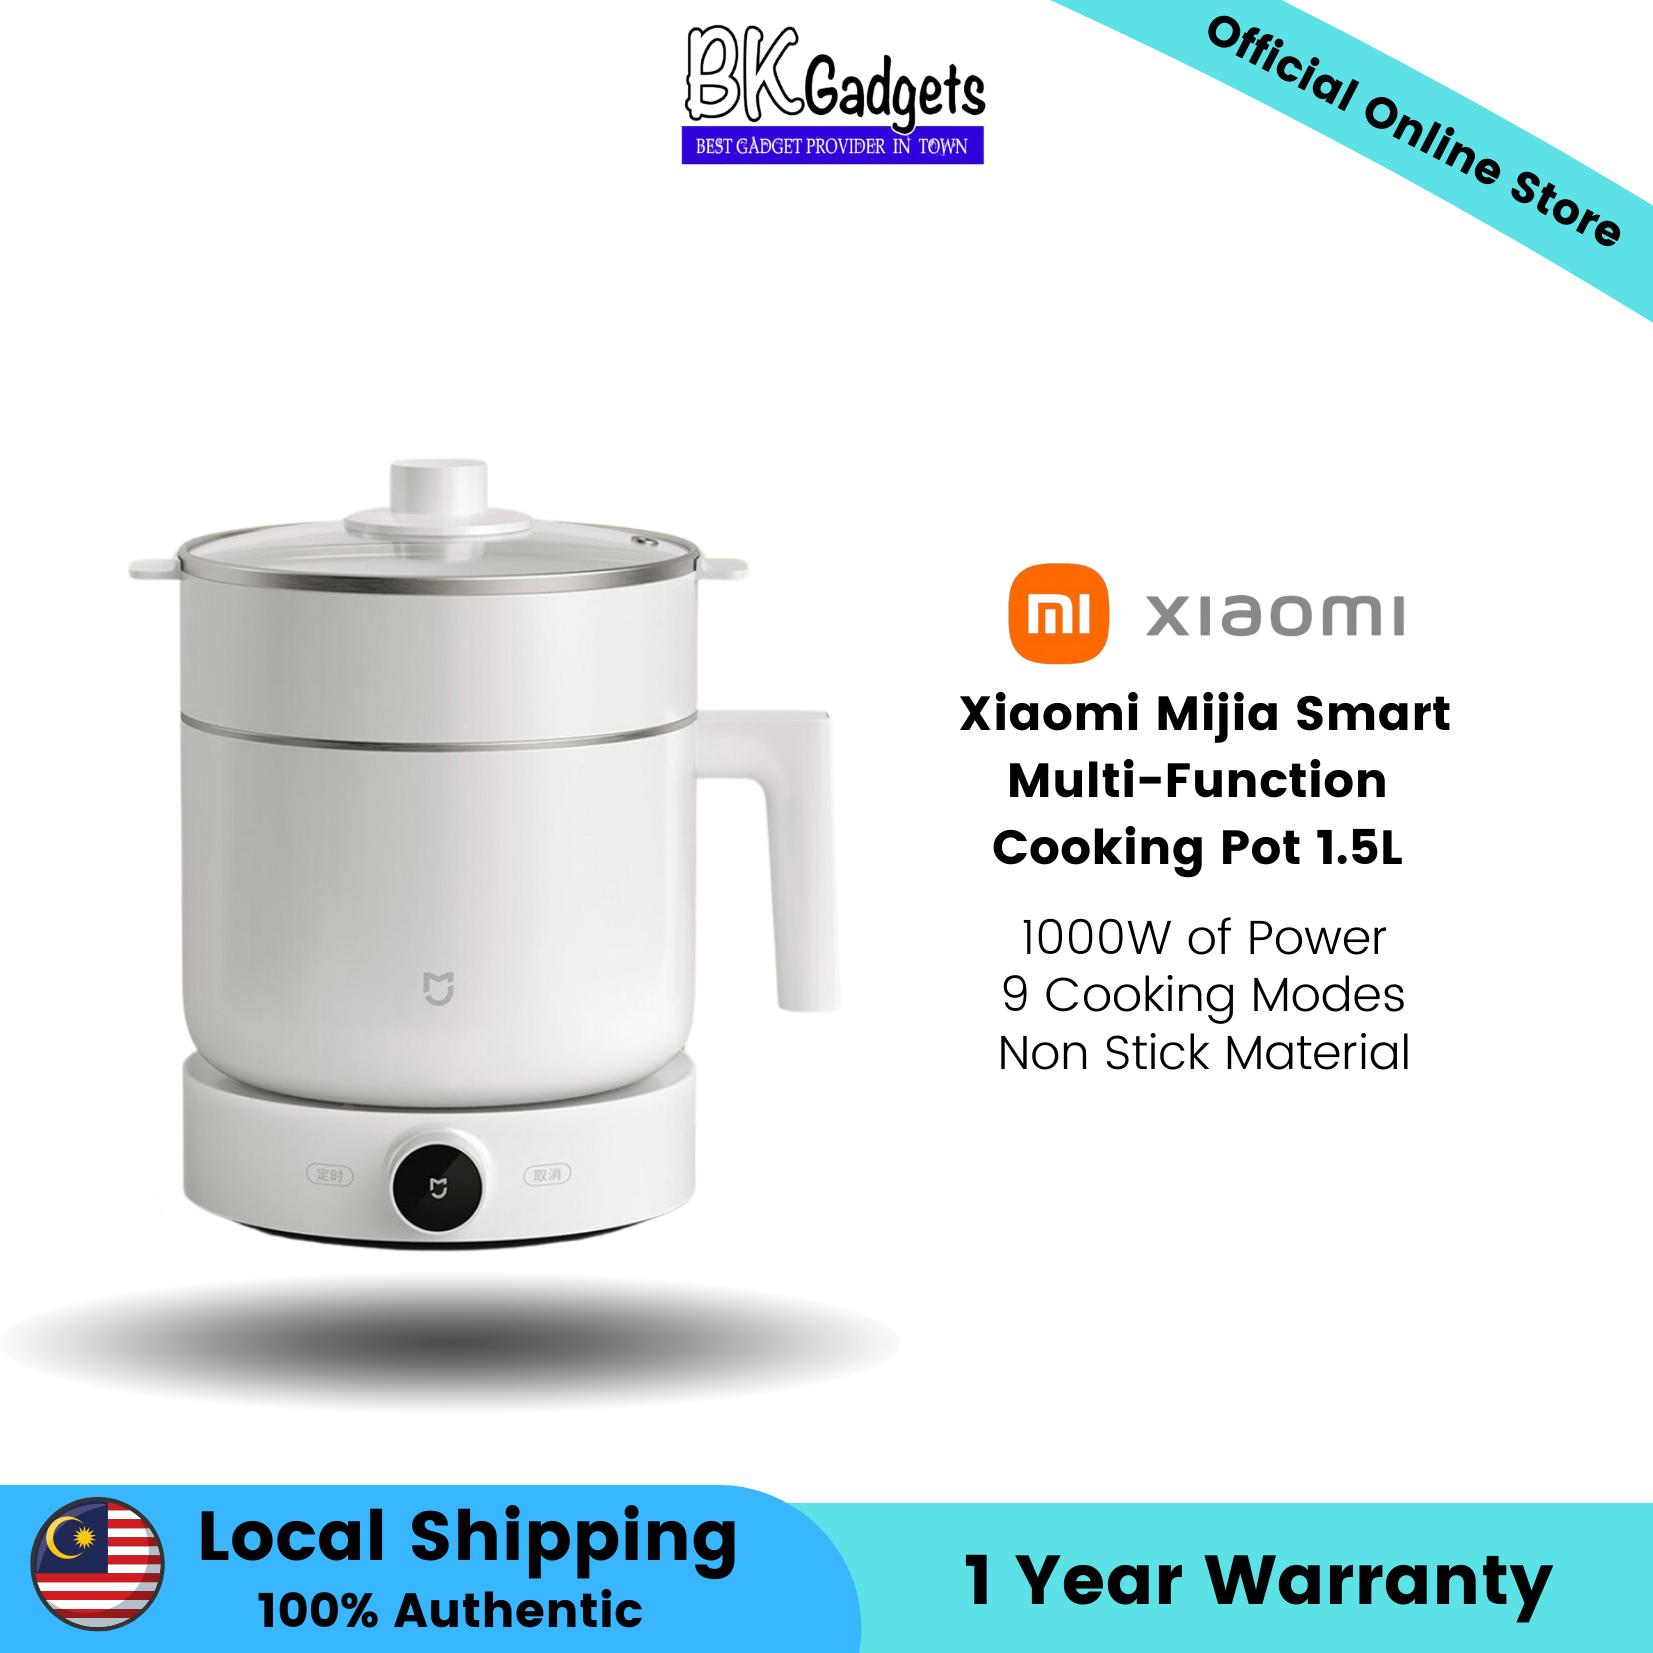 Xiaomi Smart Multi-Function Cooking Pot 1.5L - 1000W of Power | 9 Cooking Modes | Non Stick Material